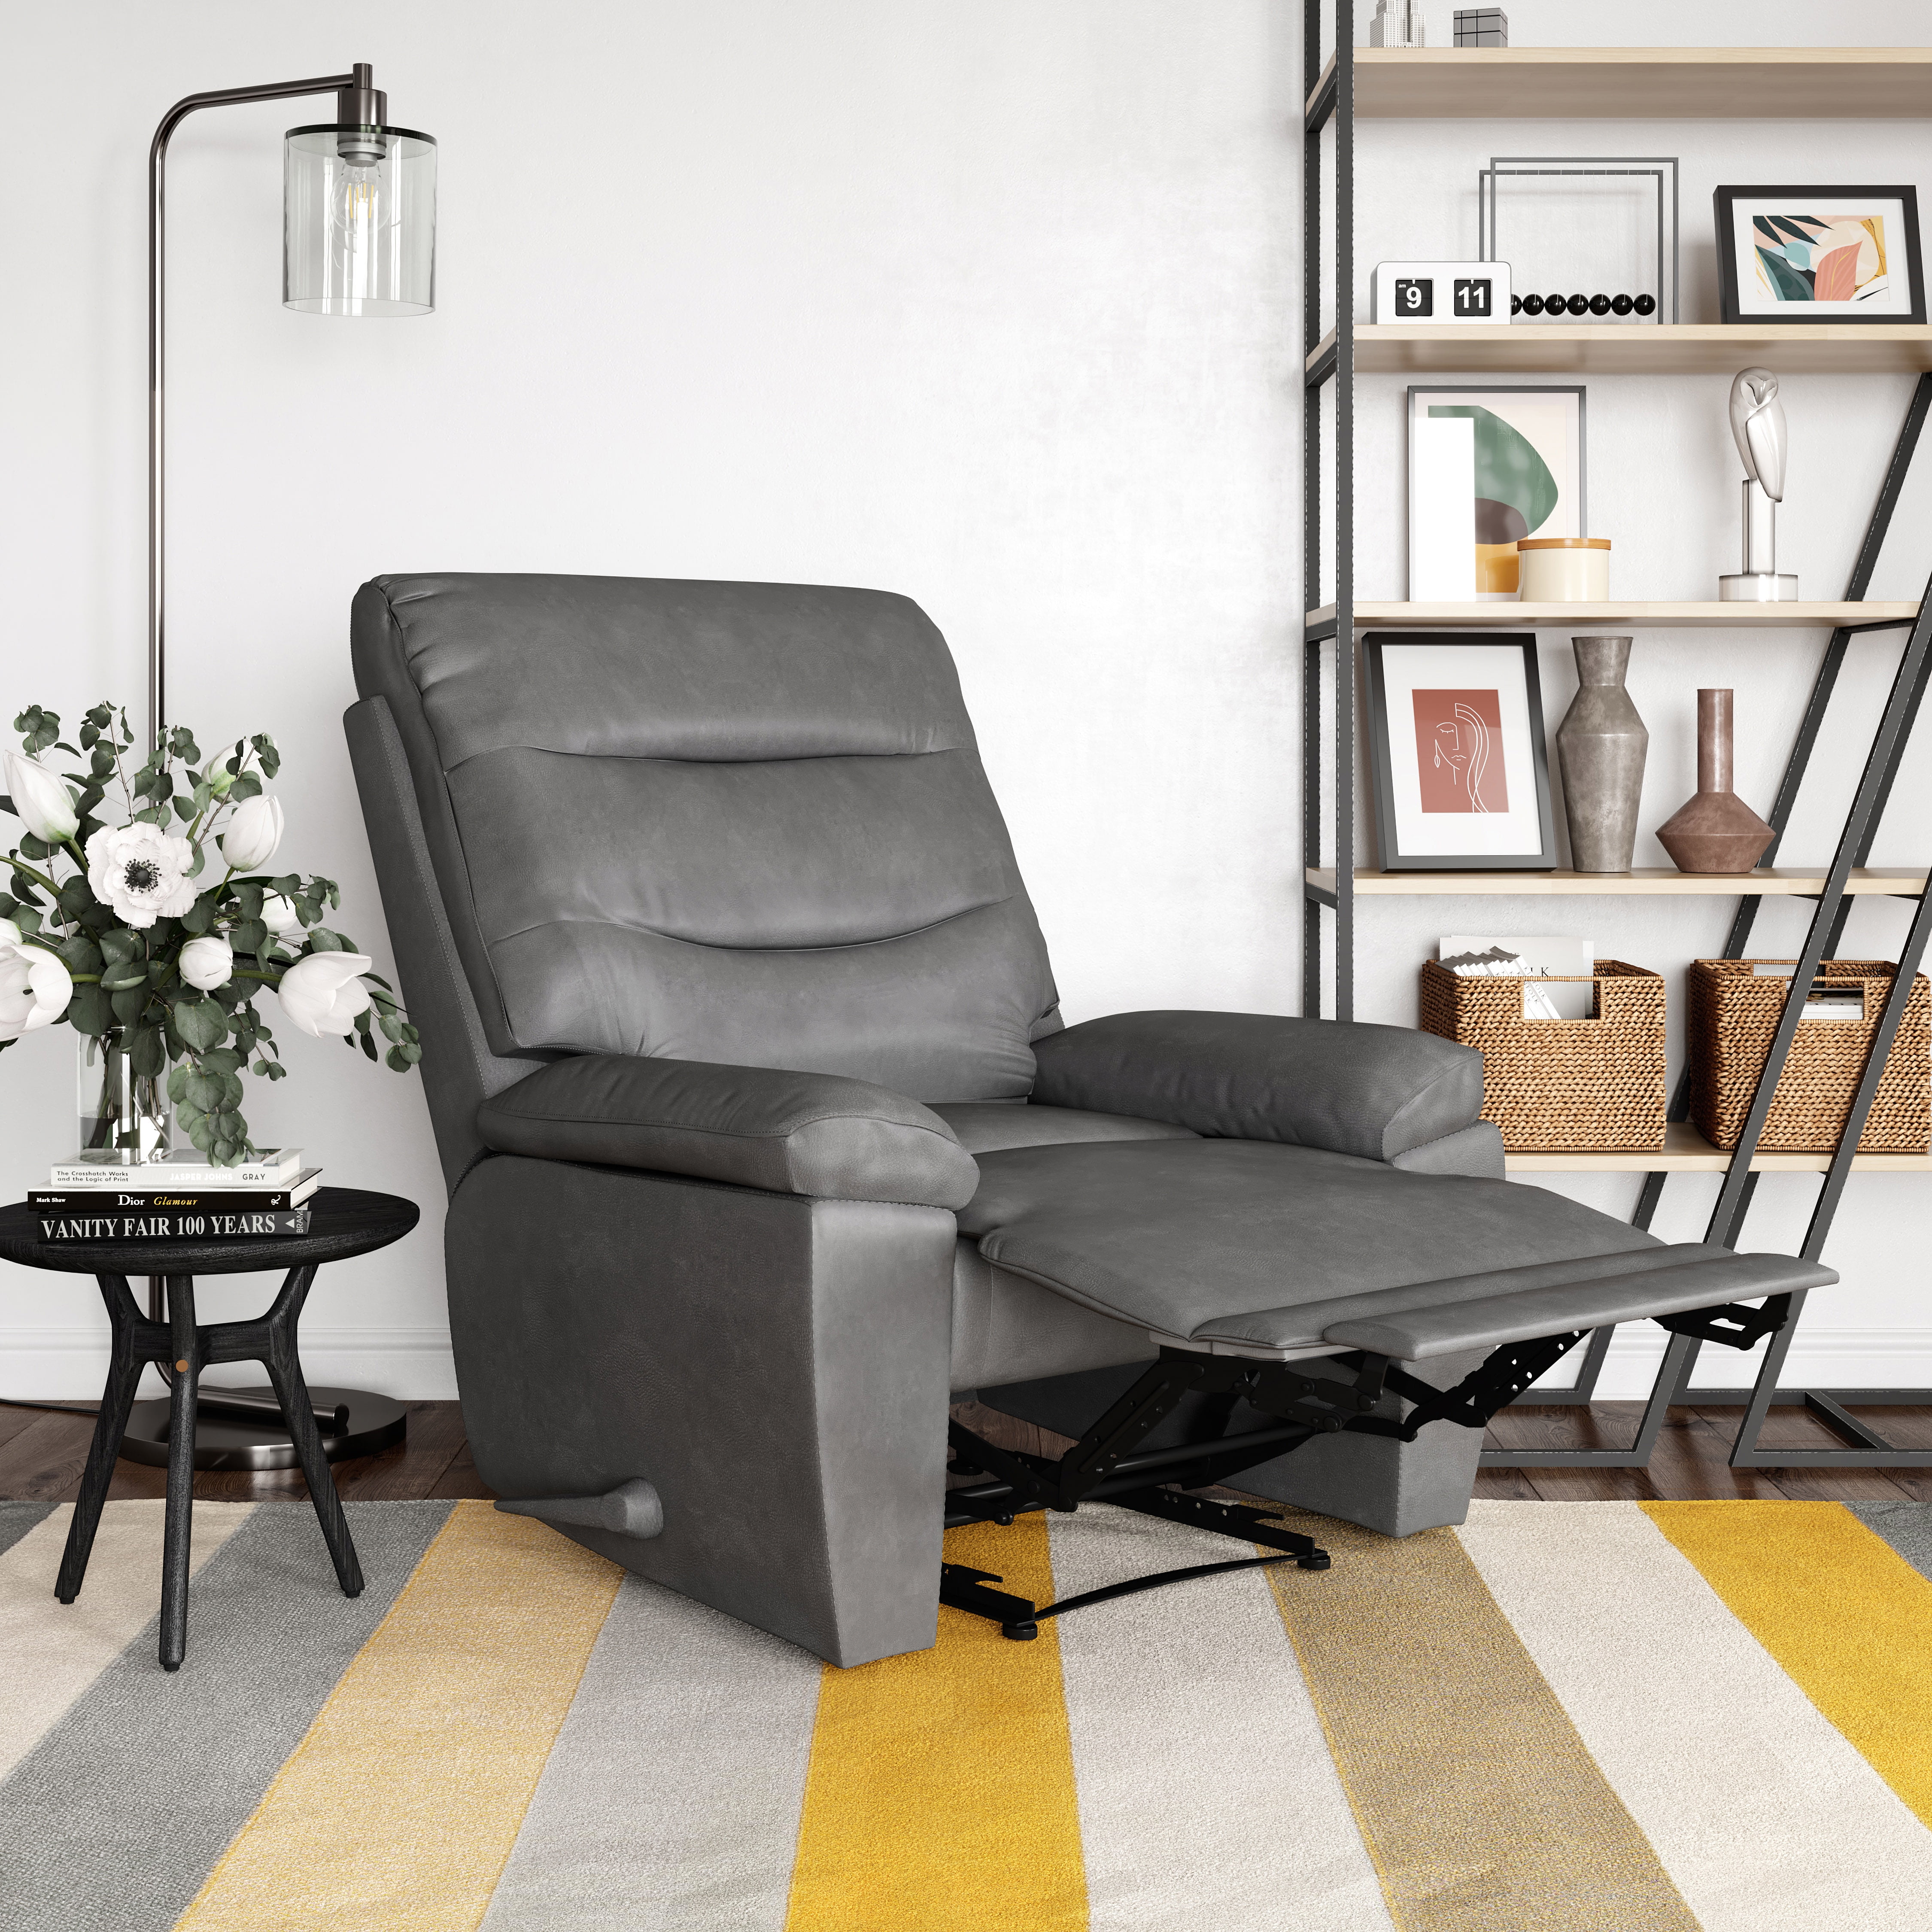 Relax A Lounger Lincoln Manual, Leather Oversized Recliner